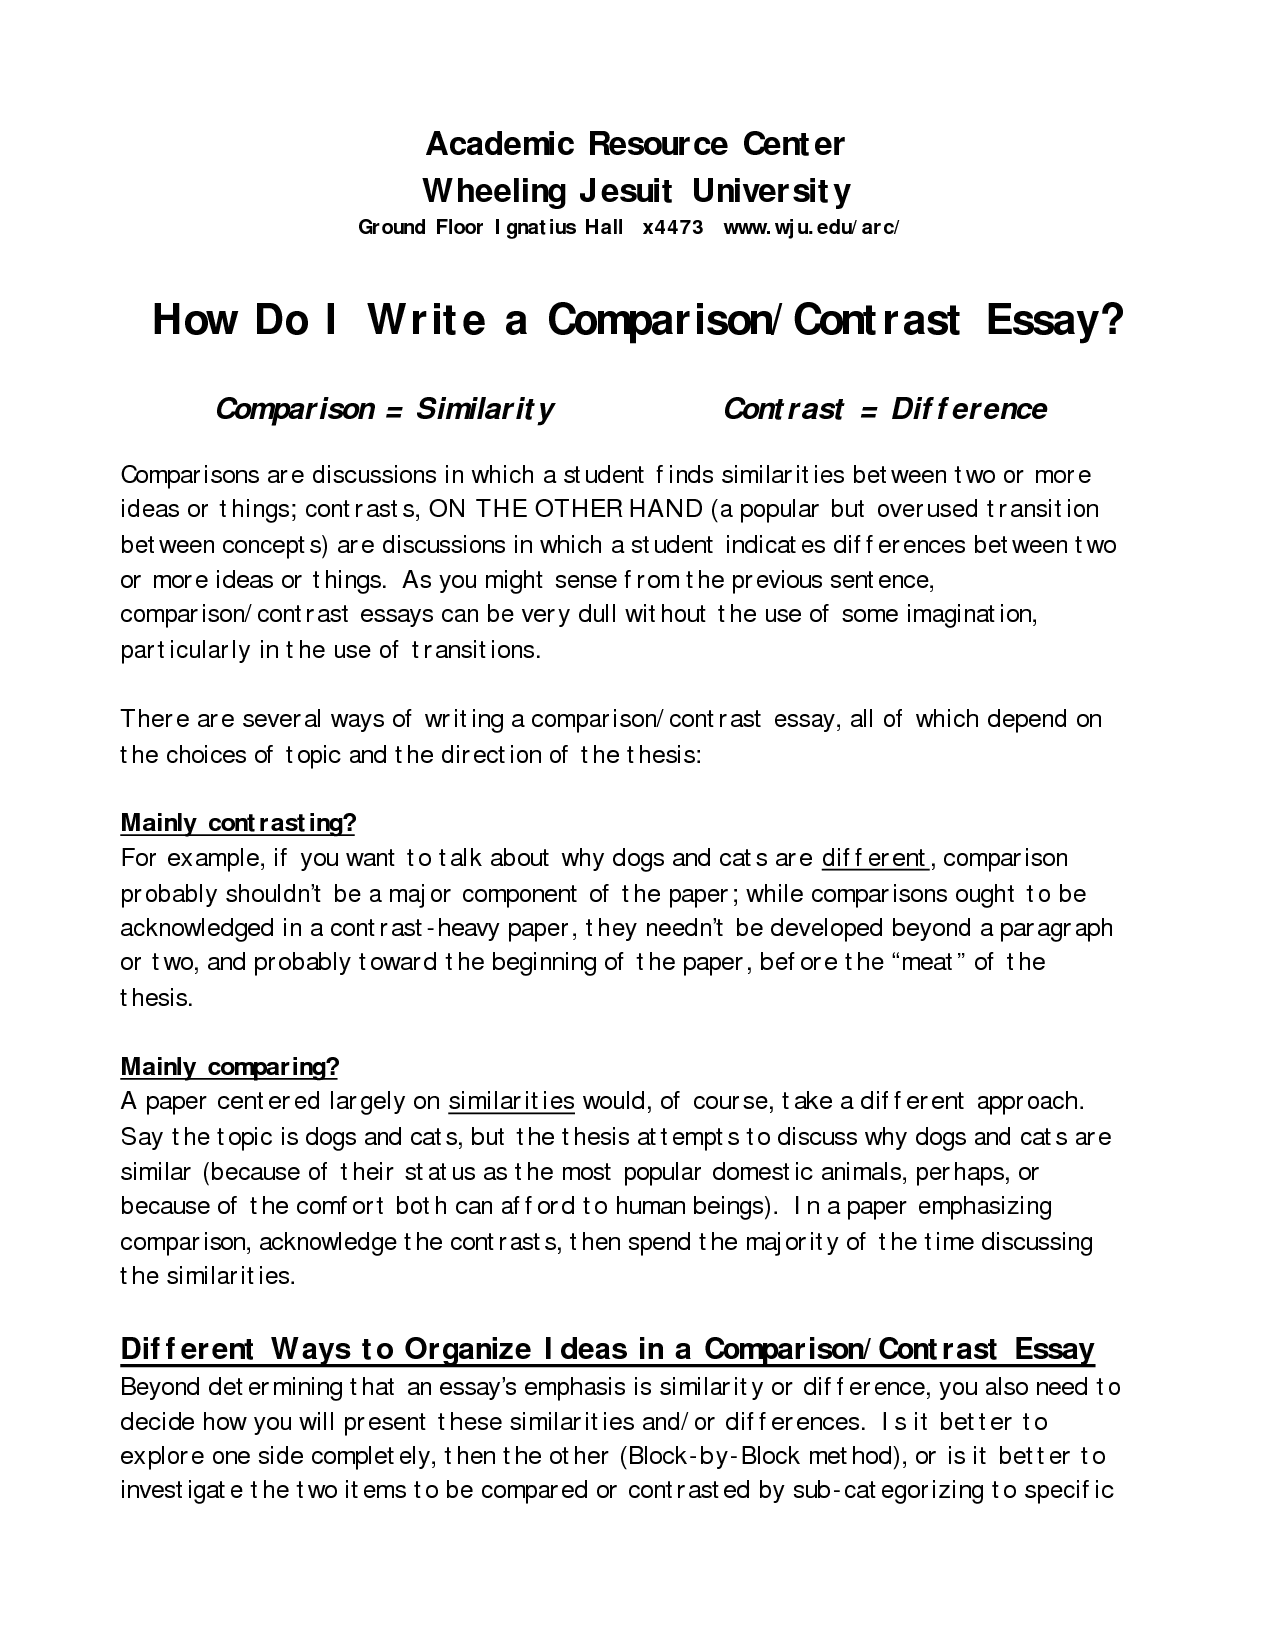 Compare contrast essay examples middle school